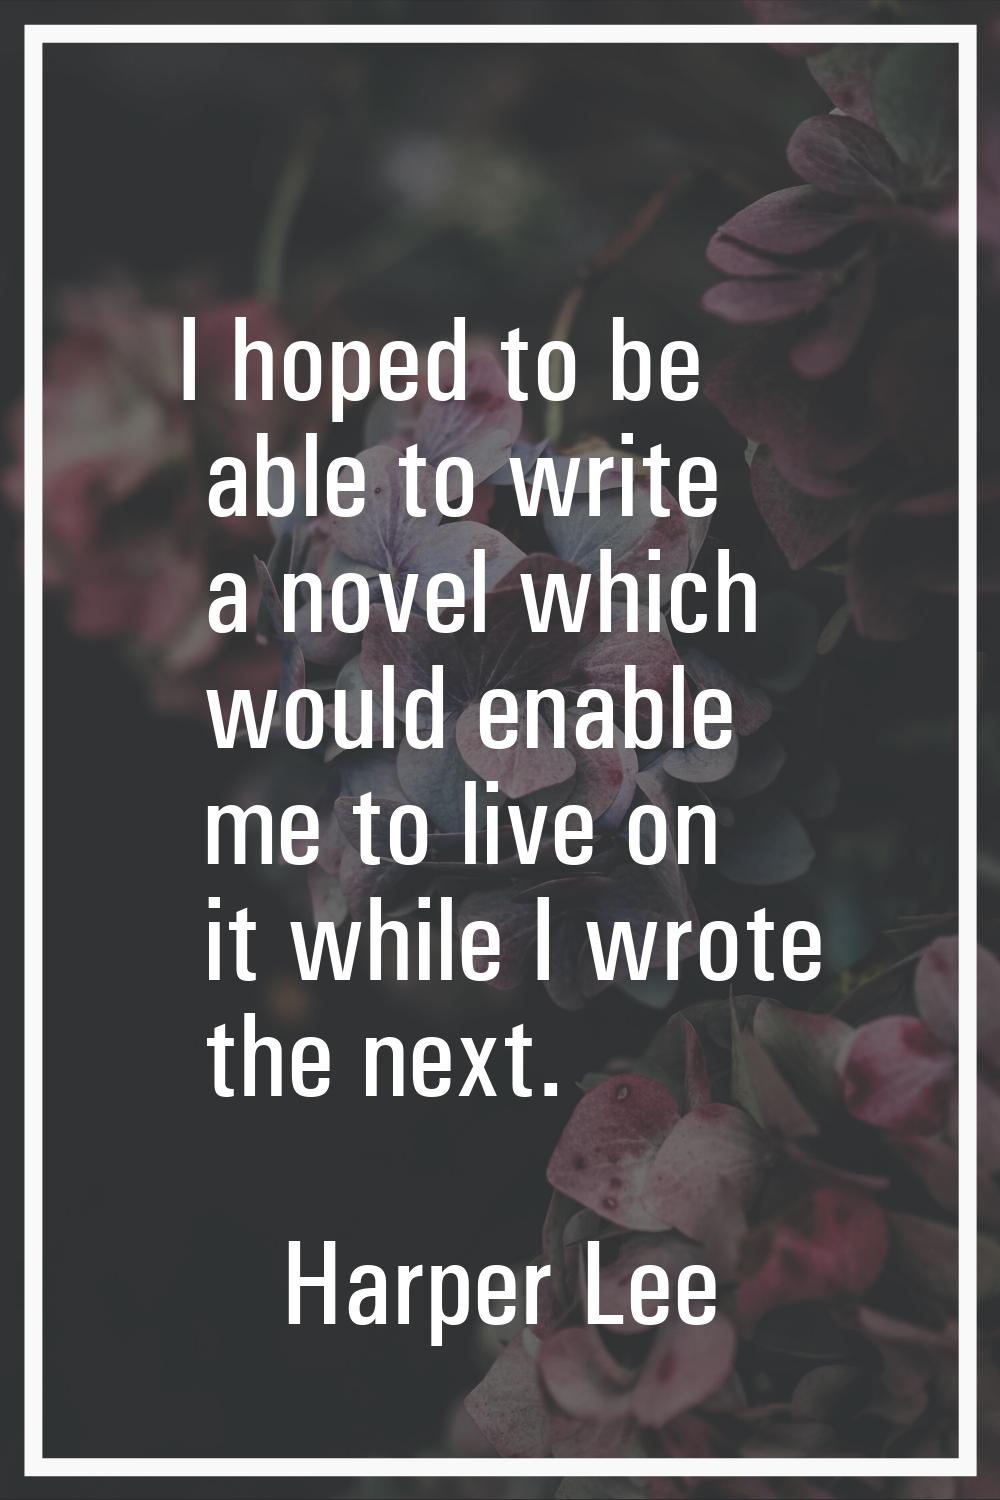 I hoped to be able to write a novel which would enable me to live on it while I wrote the next.